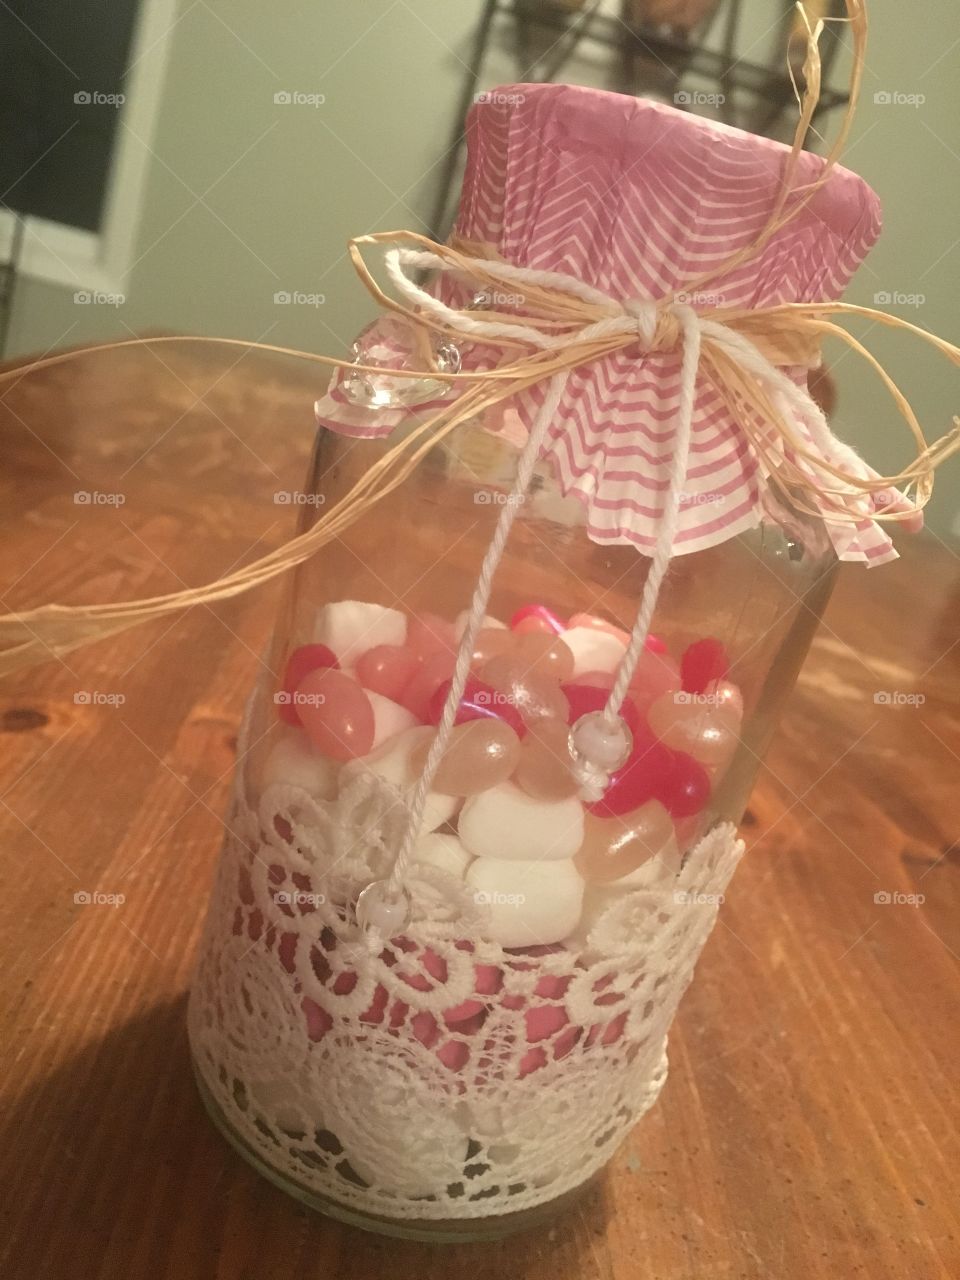 A jar of candy